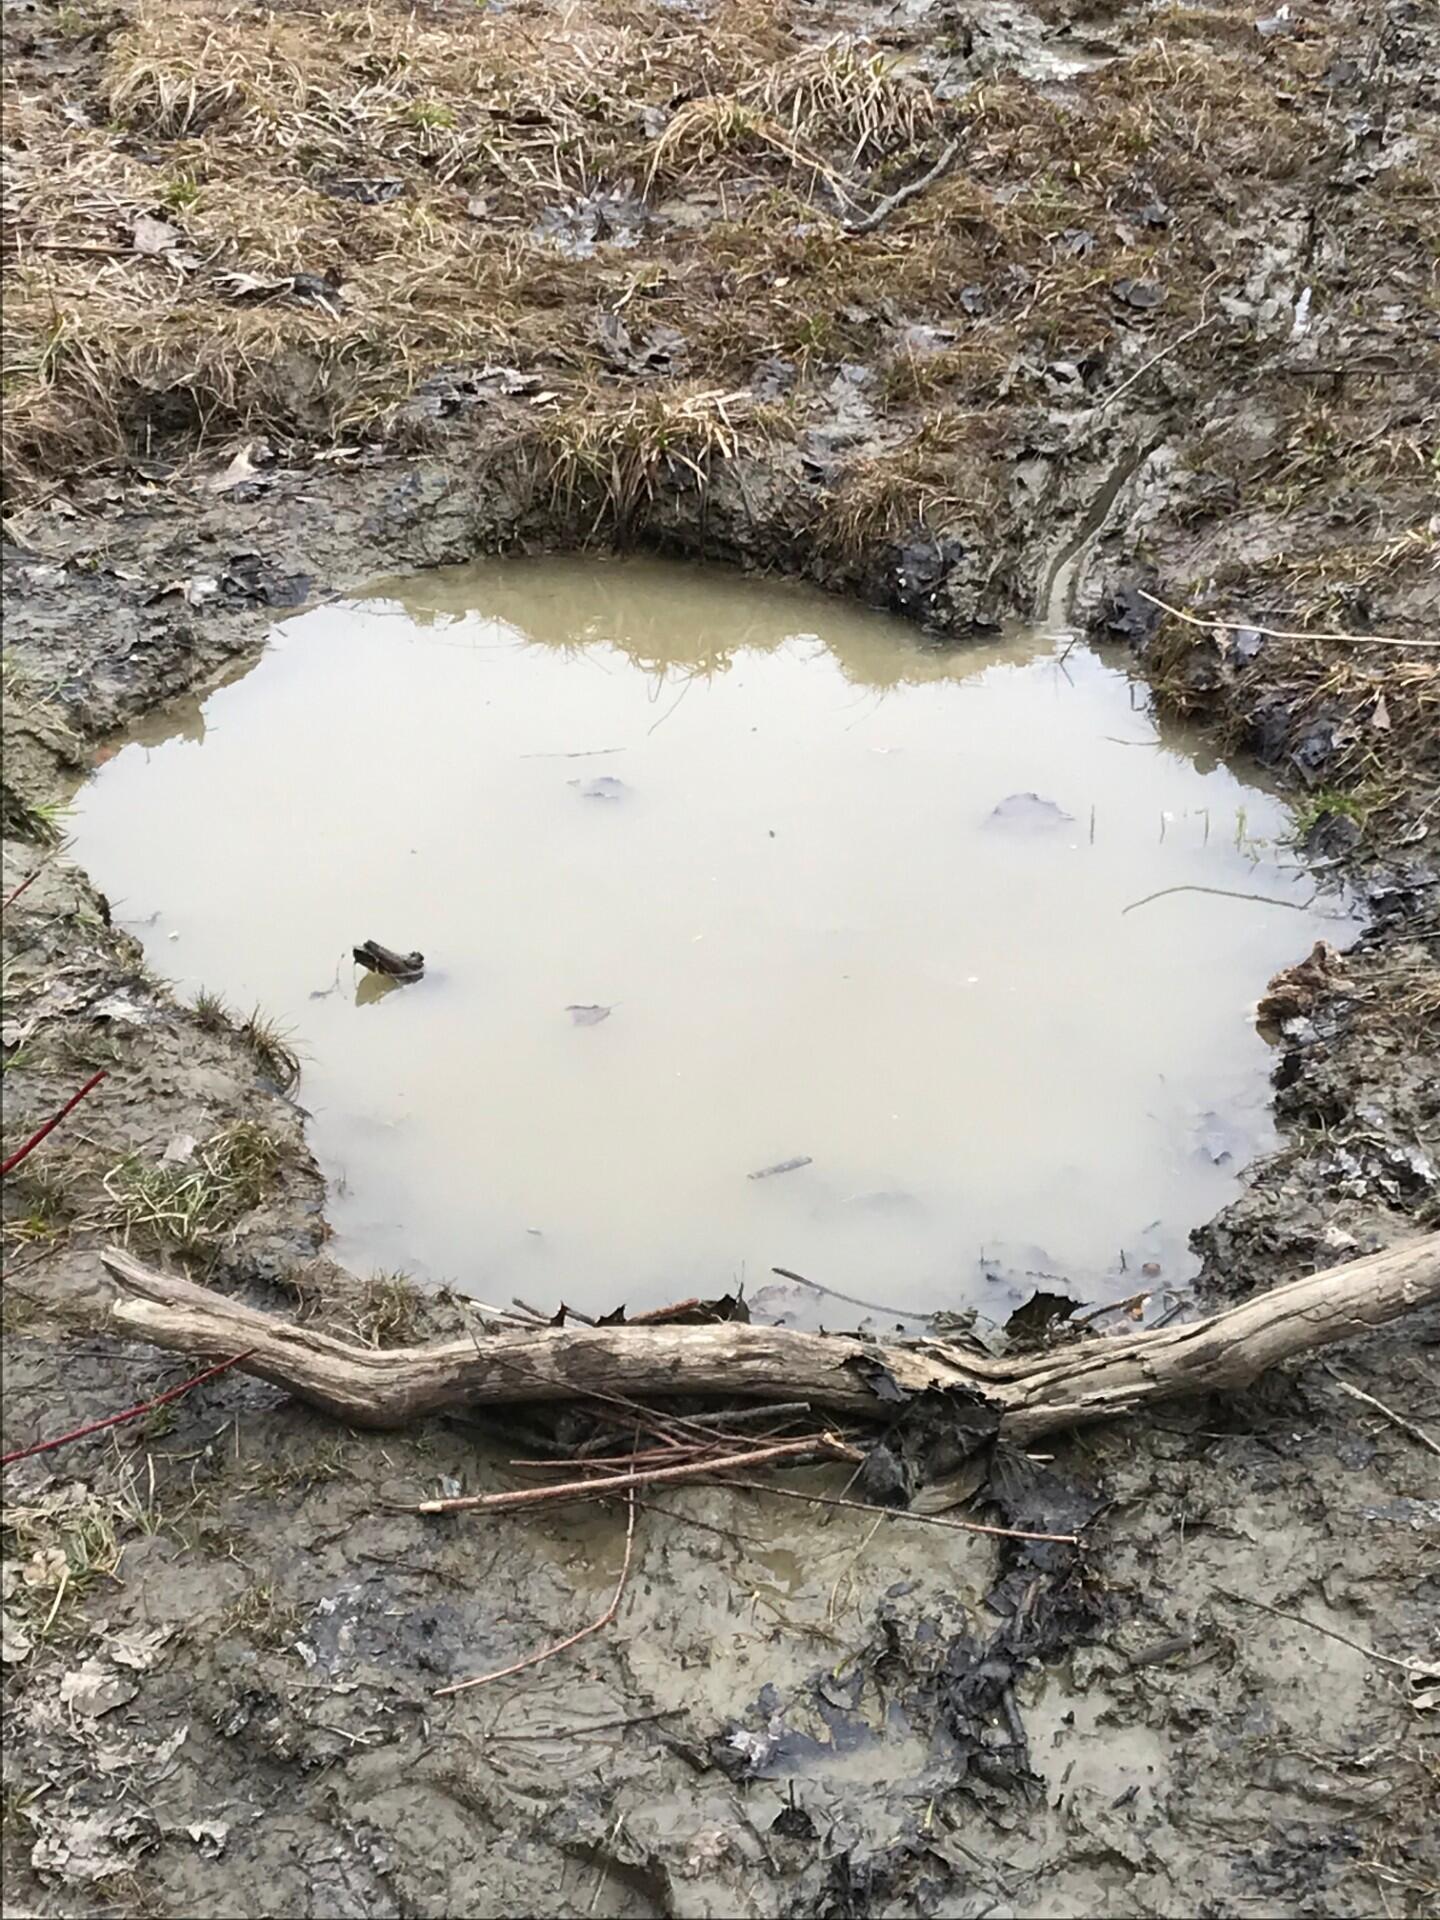 A muddy puddle holds water in place for two hours!